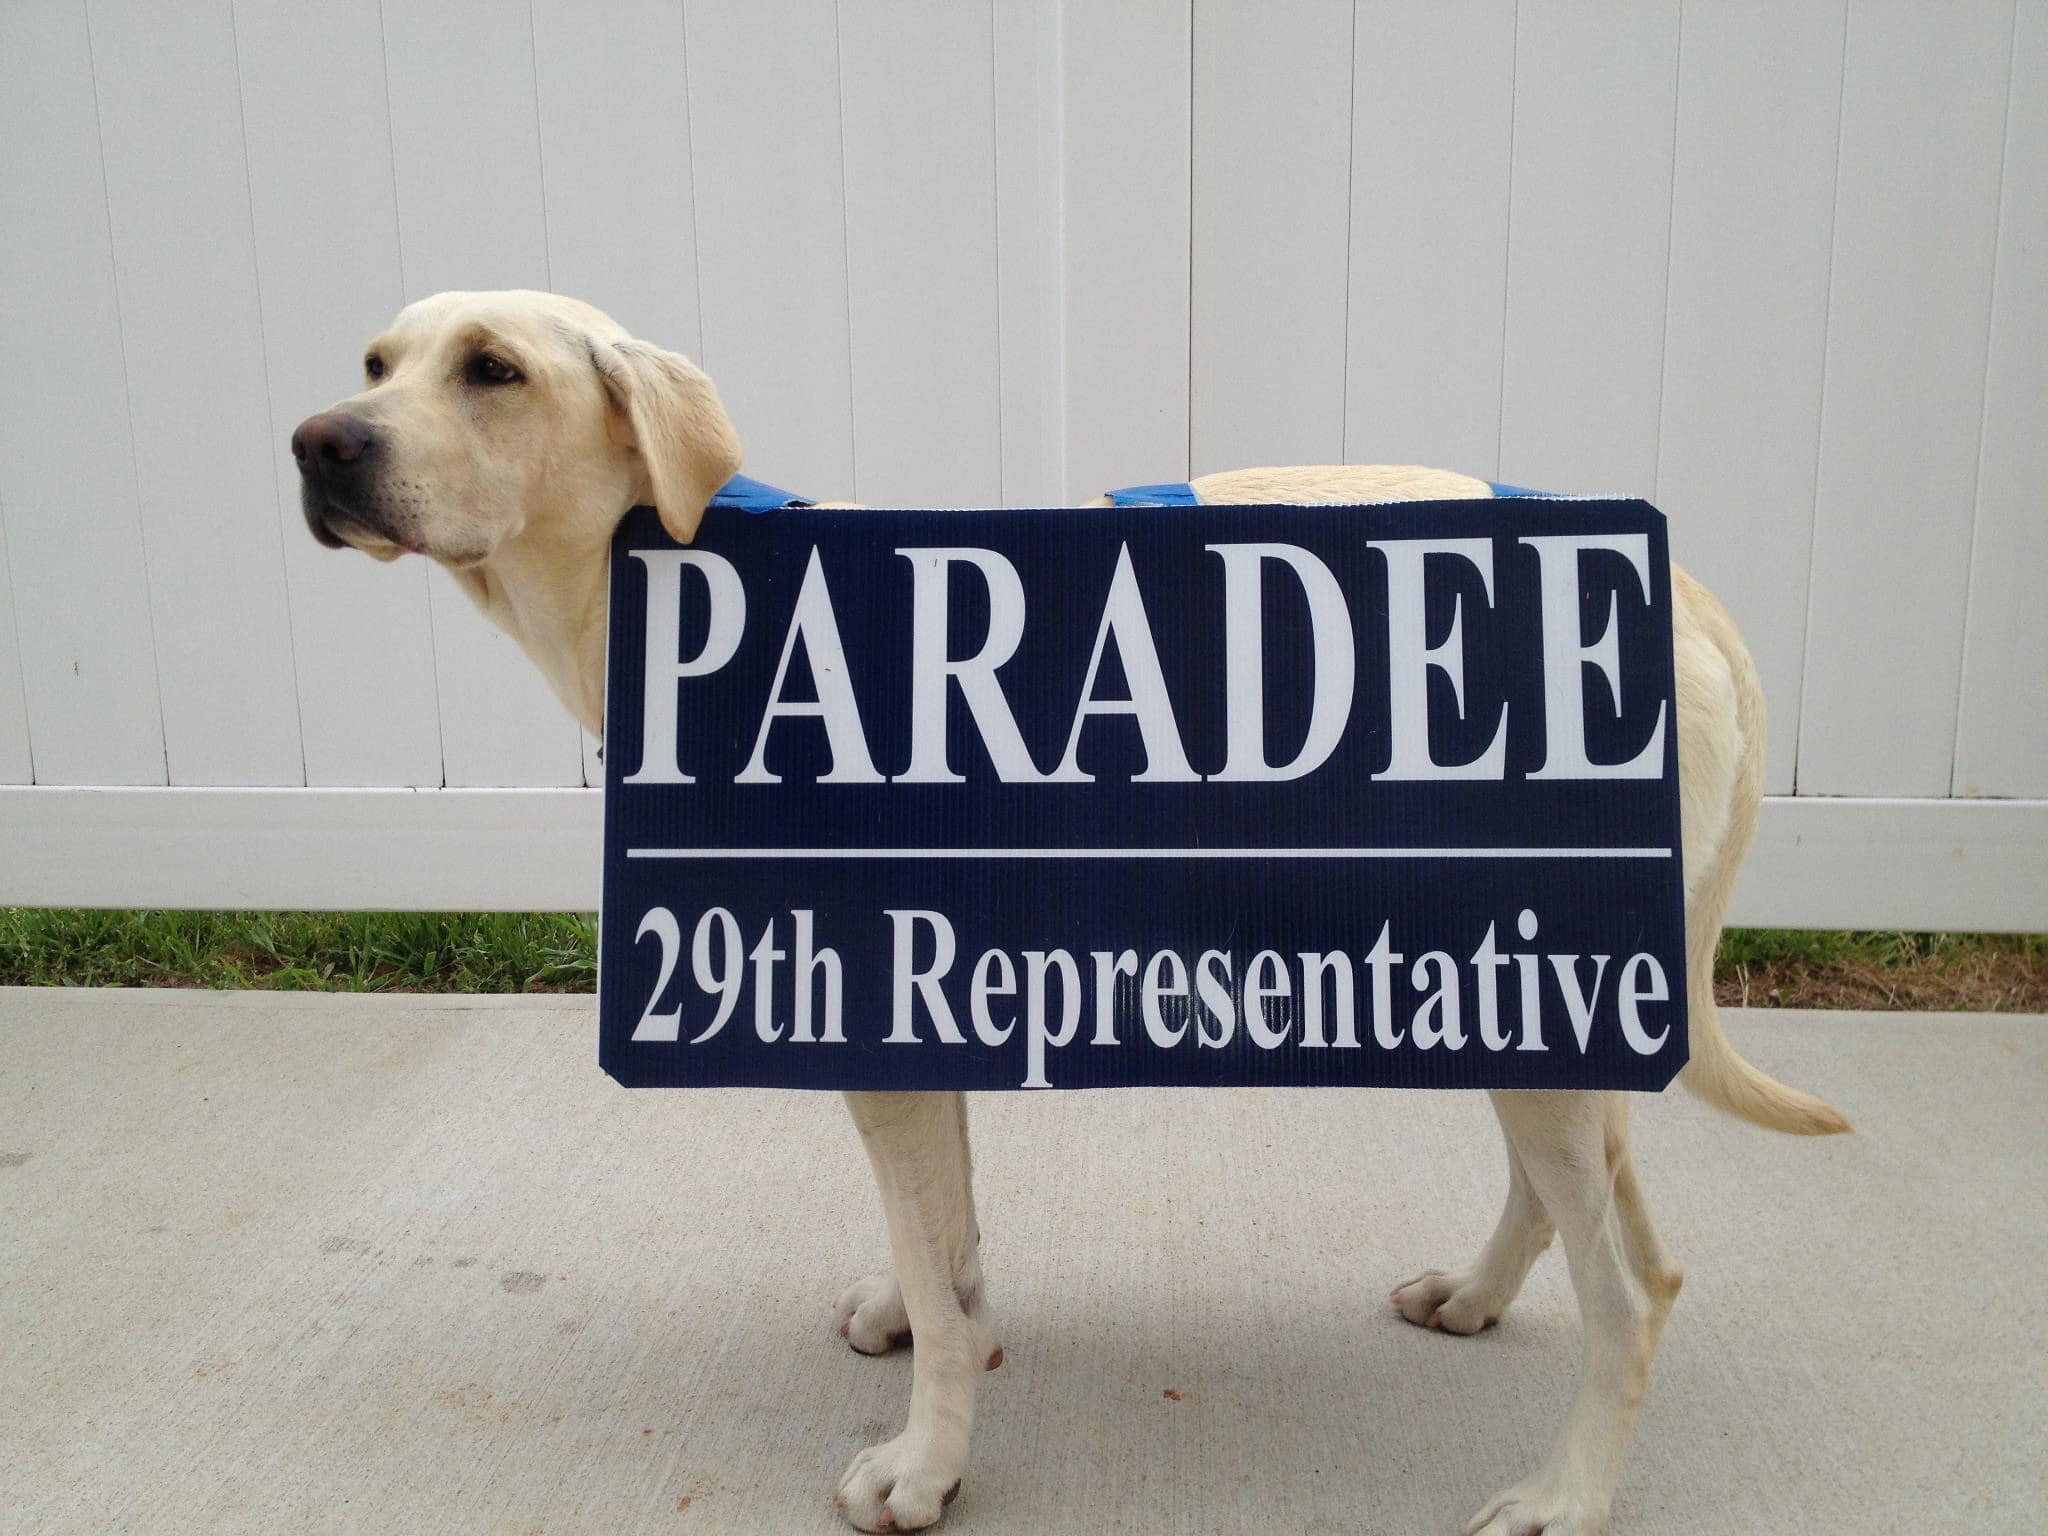 yellow lab holding paradee election sign